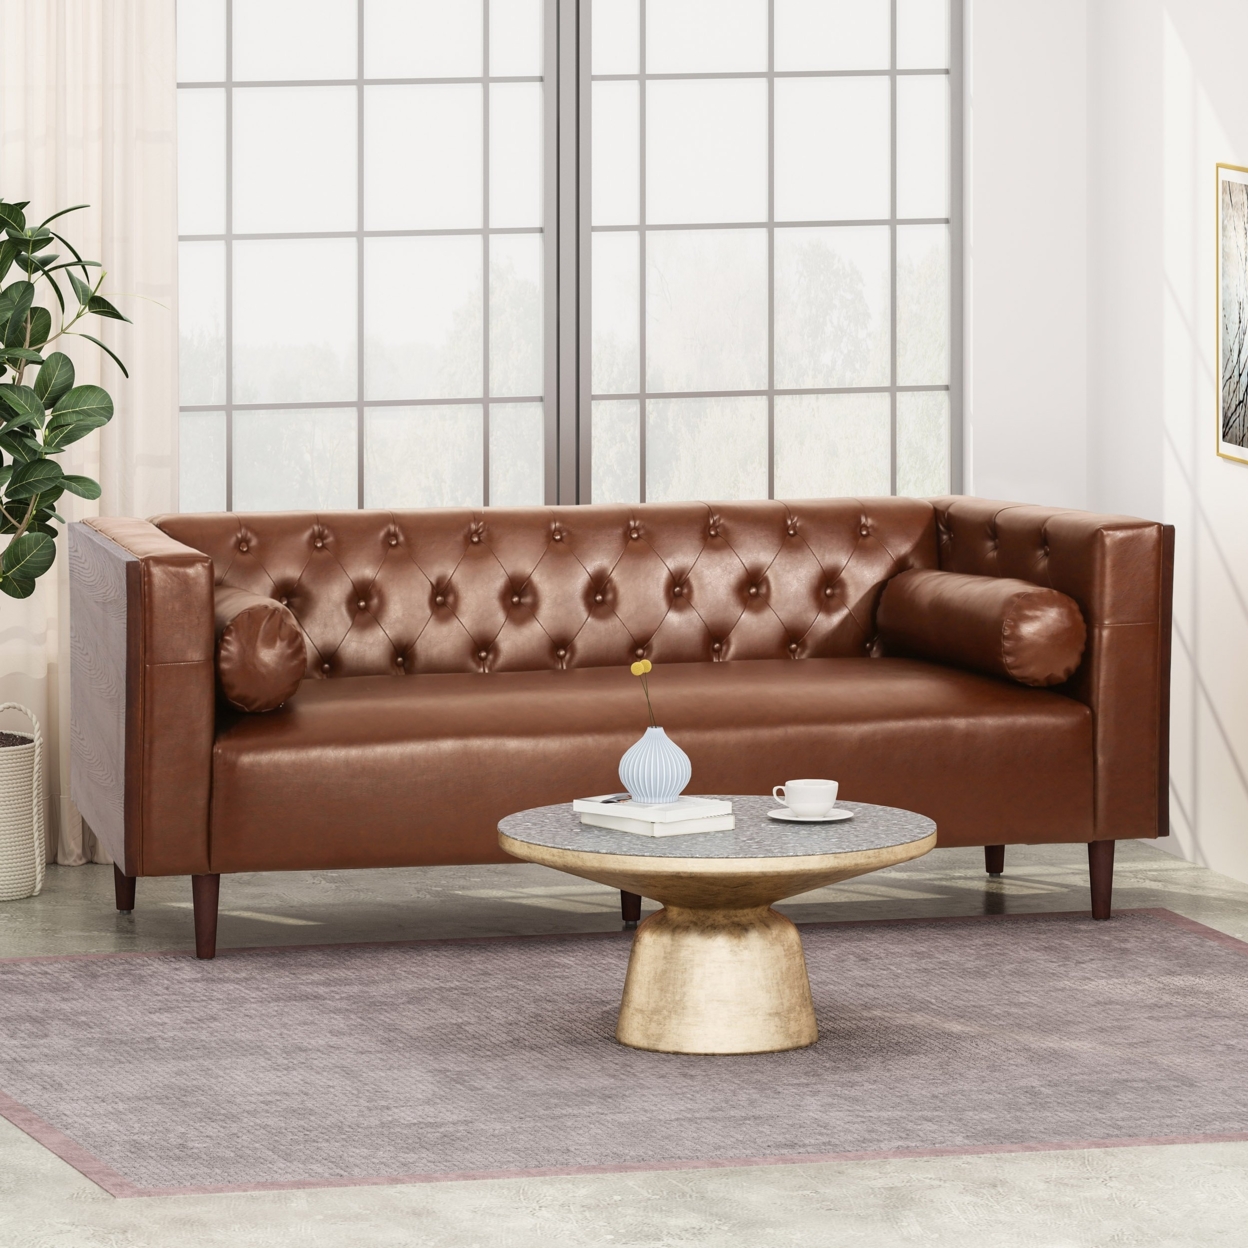 Neilan Contemporary Tufted Deep Seated Sofa With Accent Pillows - Dark Brown